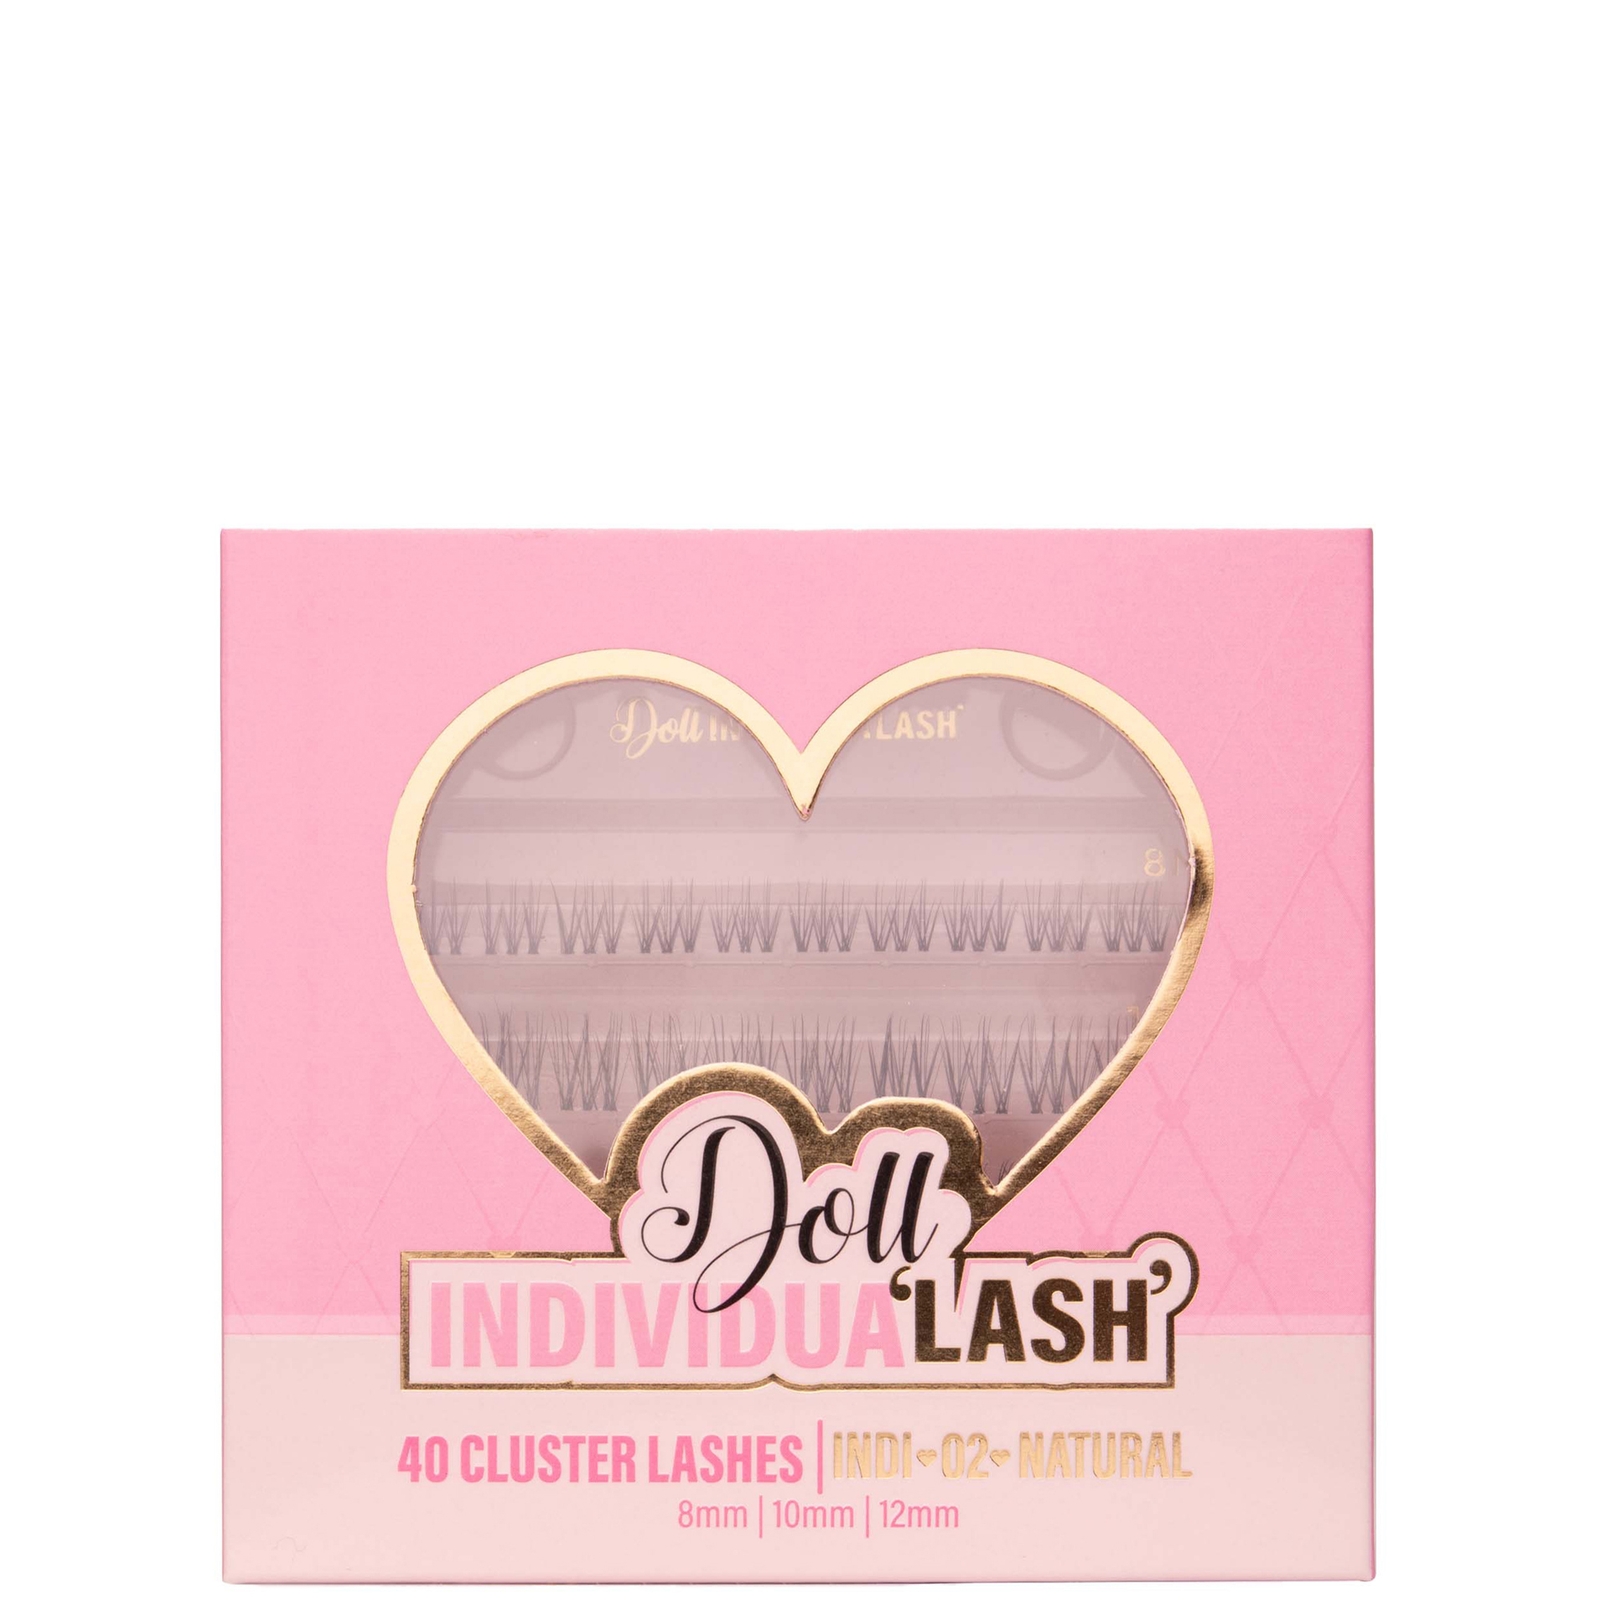 Doll Beauty Individual Lashes - Natural 02 In White